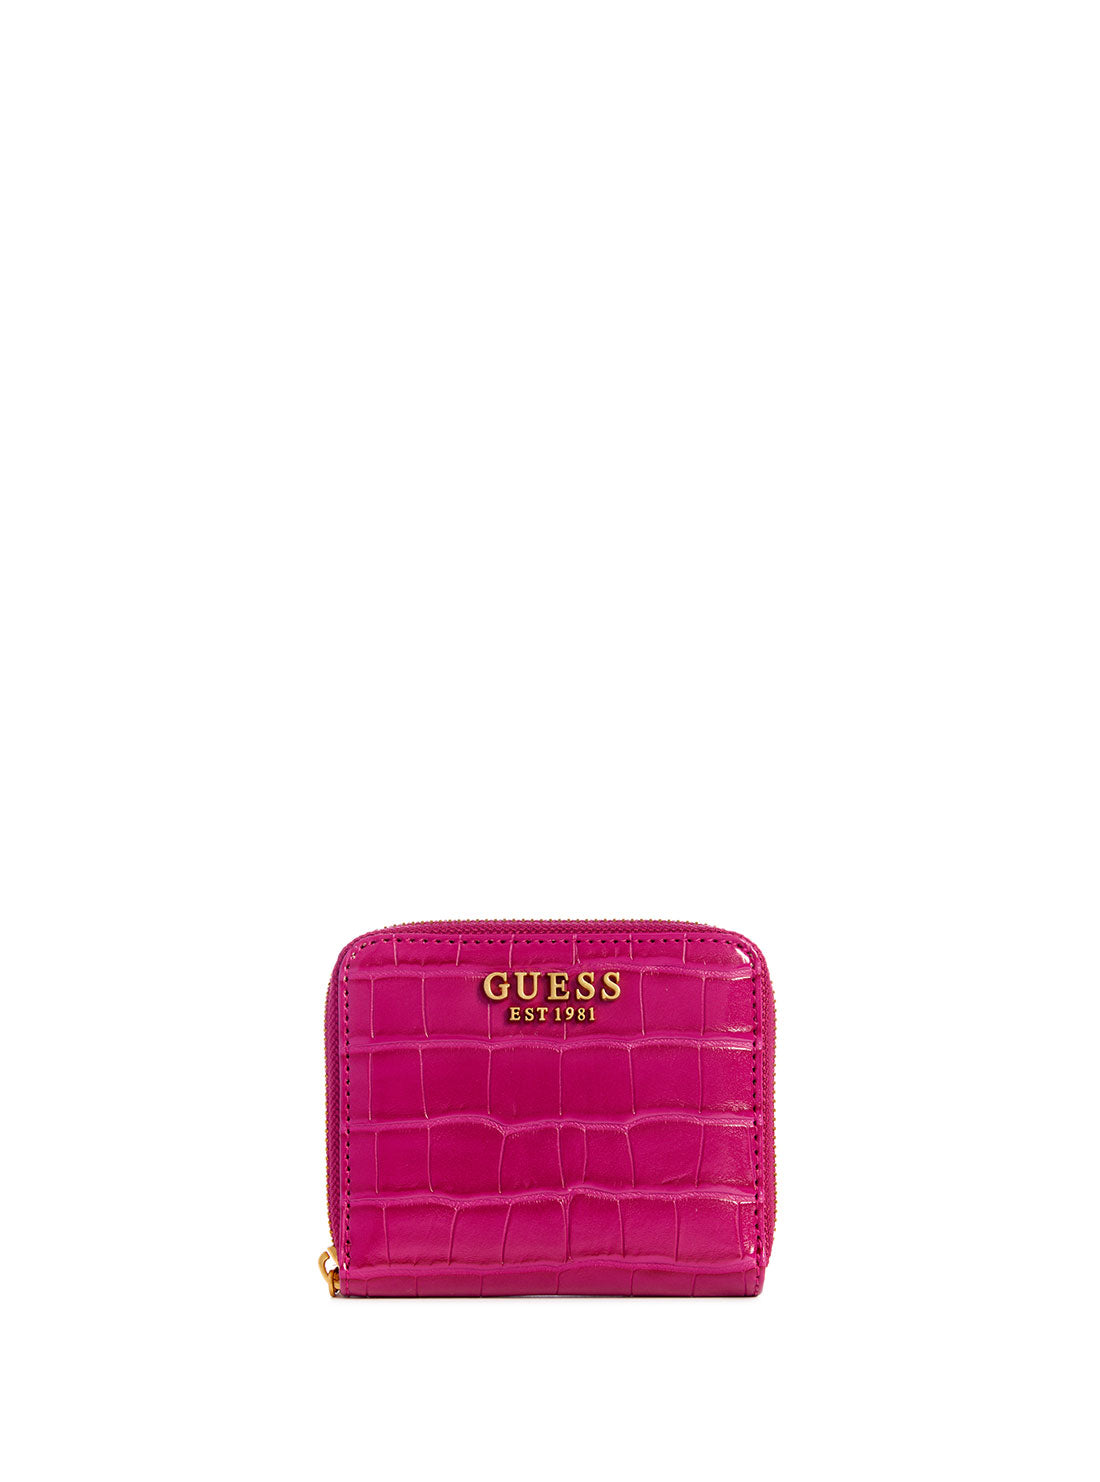 GUESS Women's Boysenberry James Croco Small Wallet CA877337 Front View